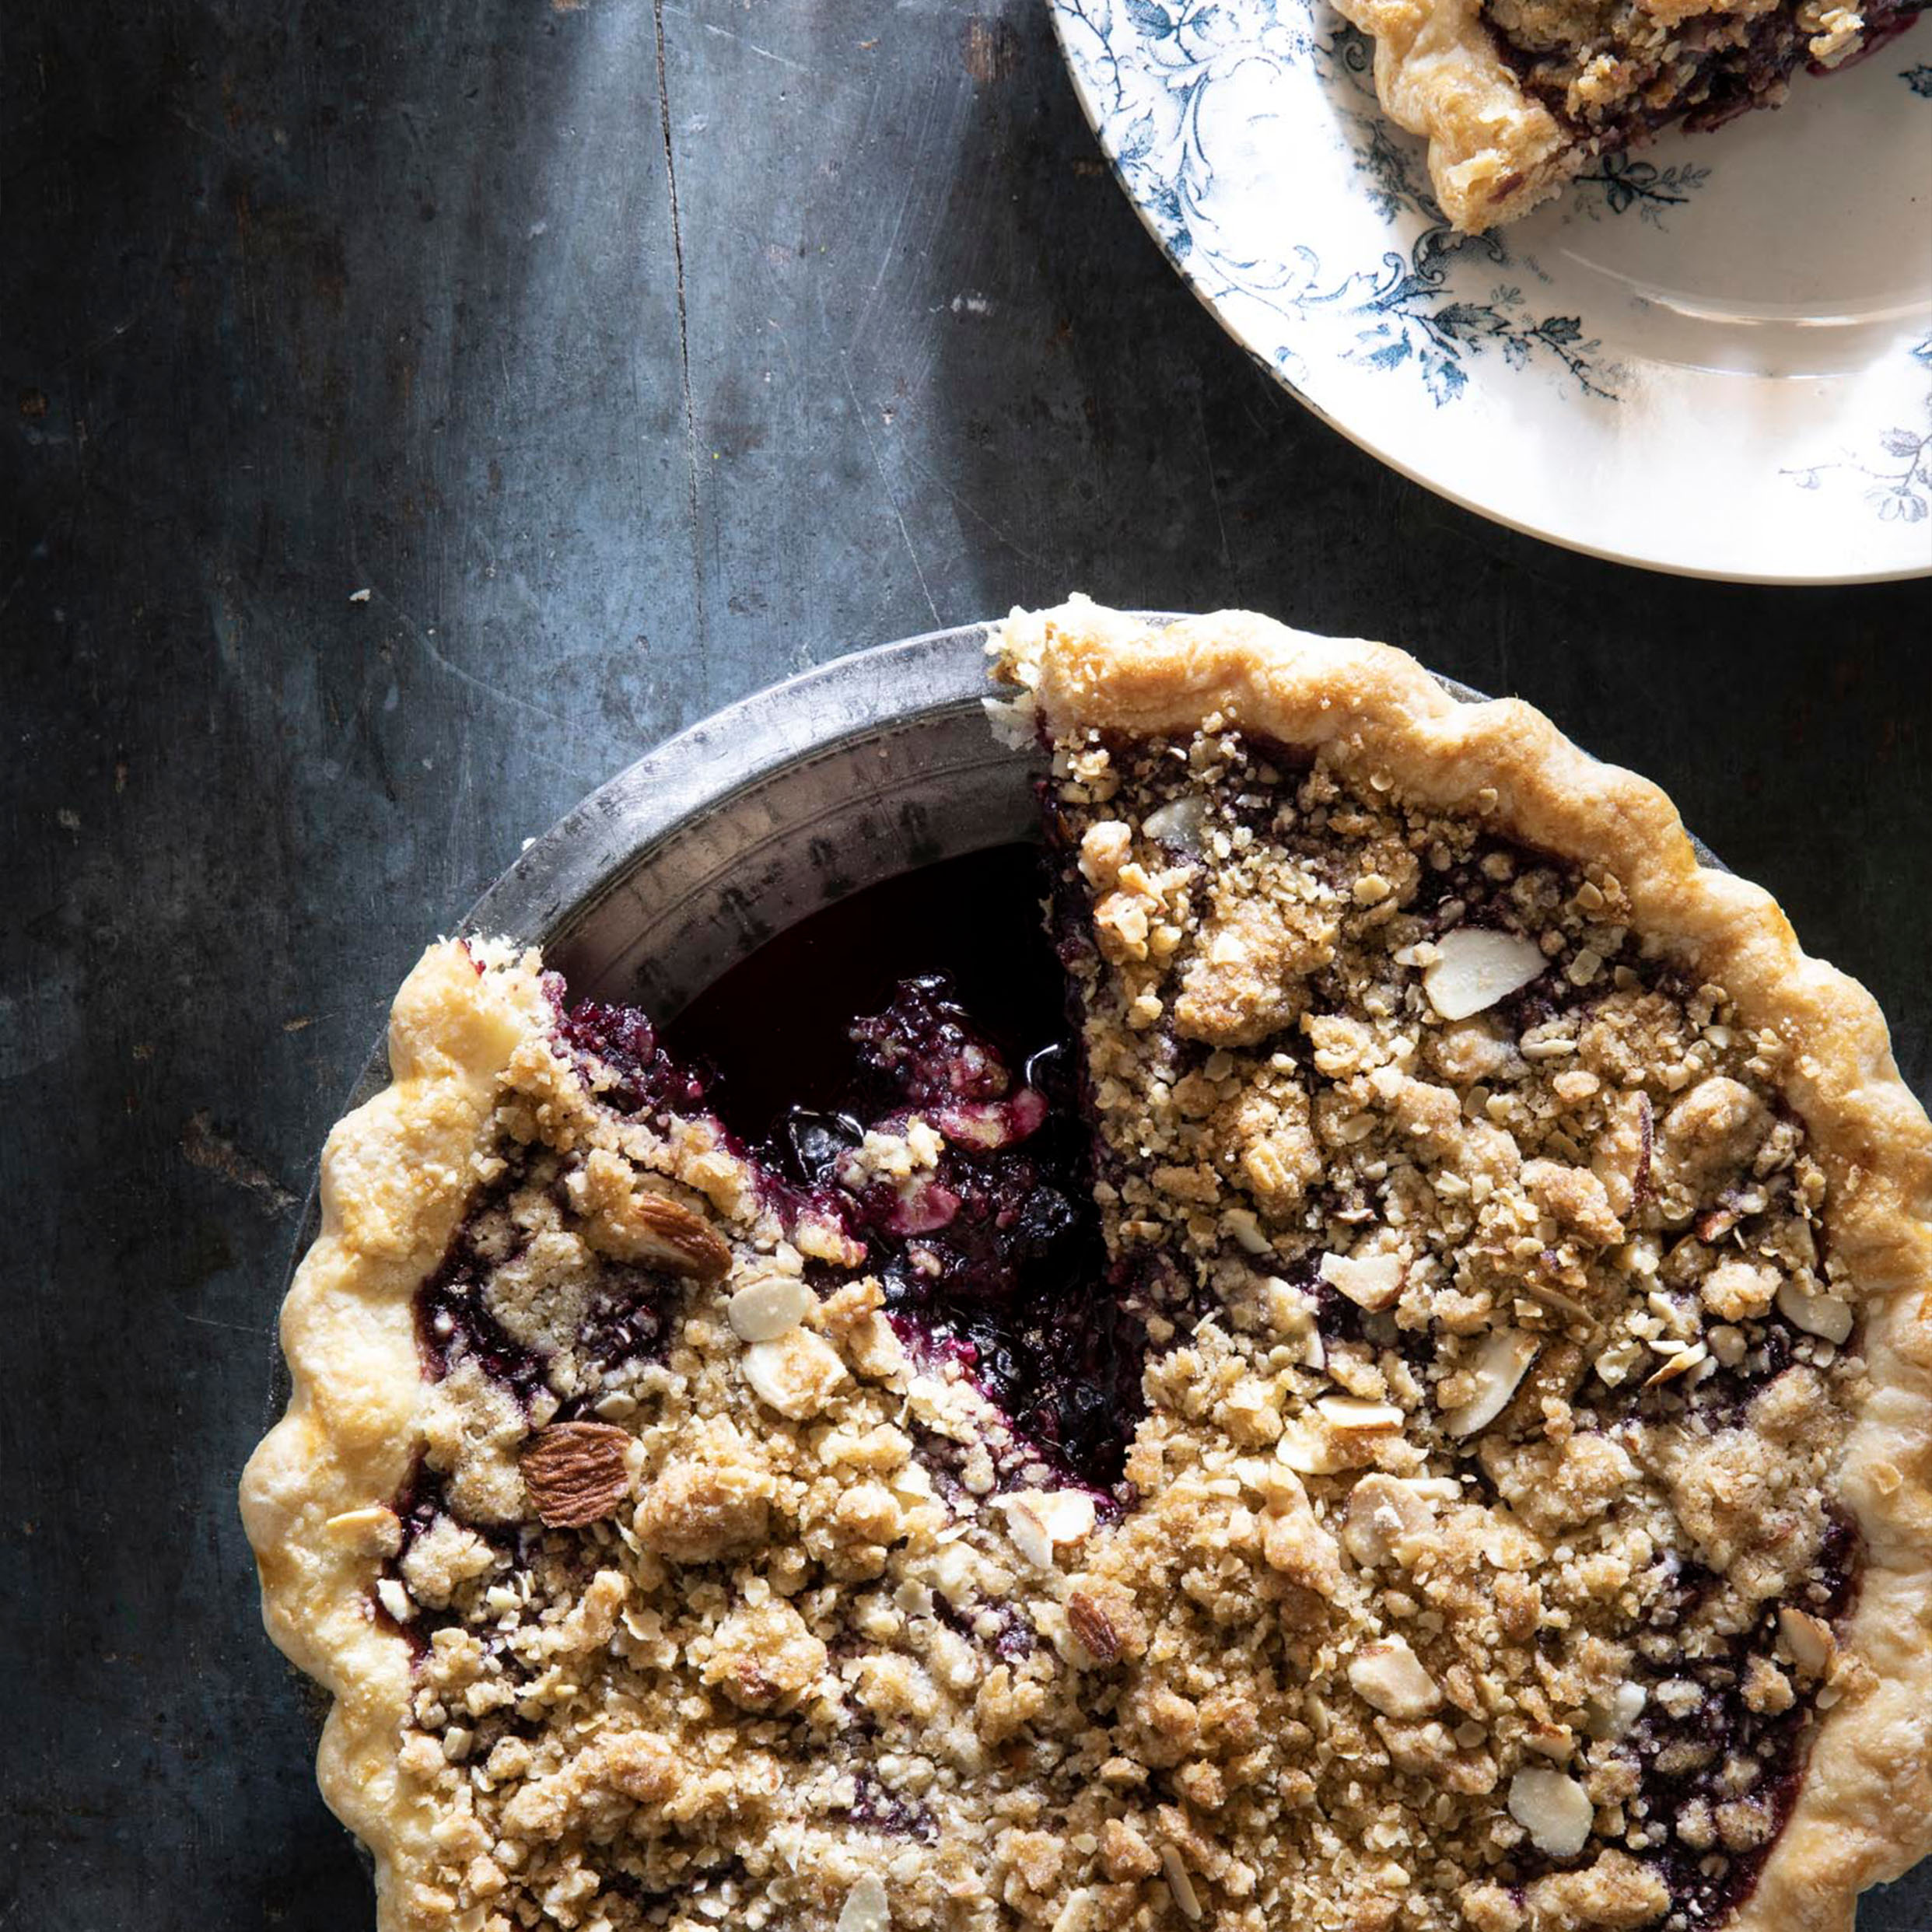 Joanna Gaines' Cherry Pie with Streusel